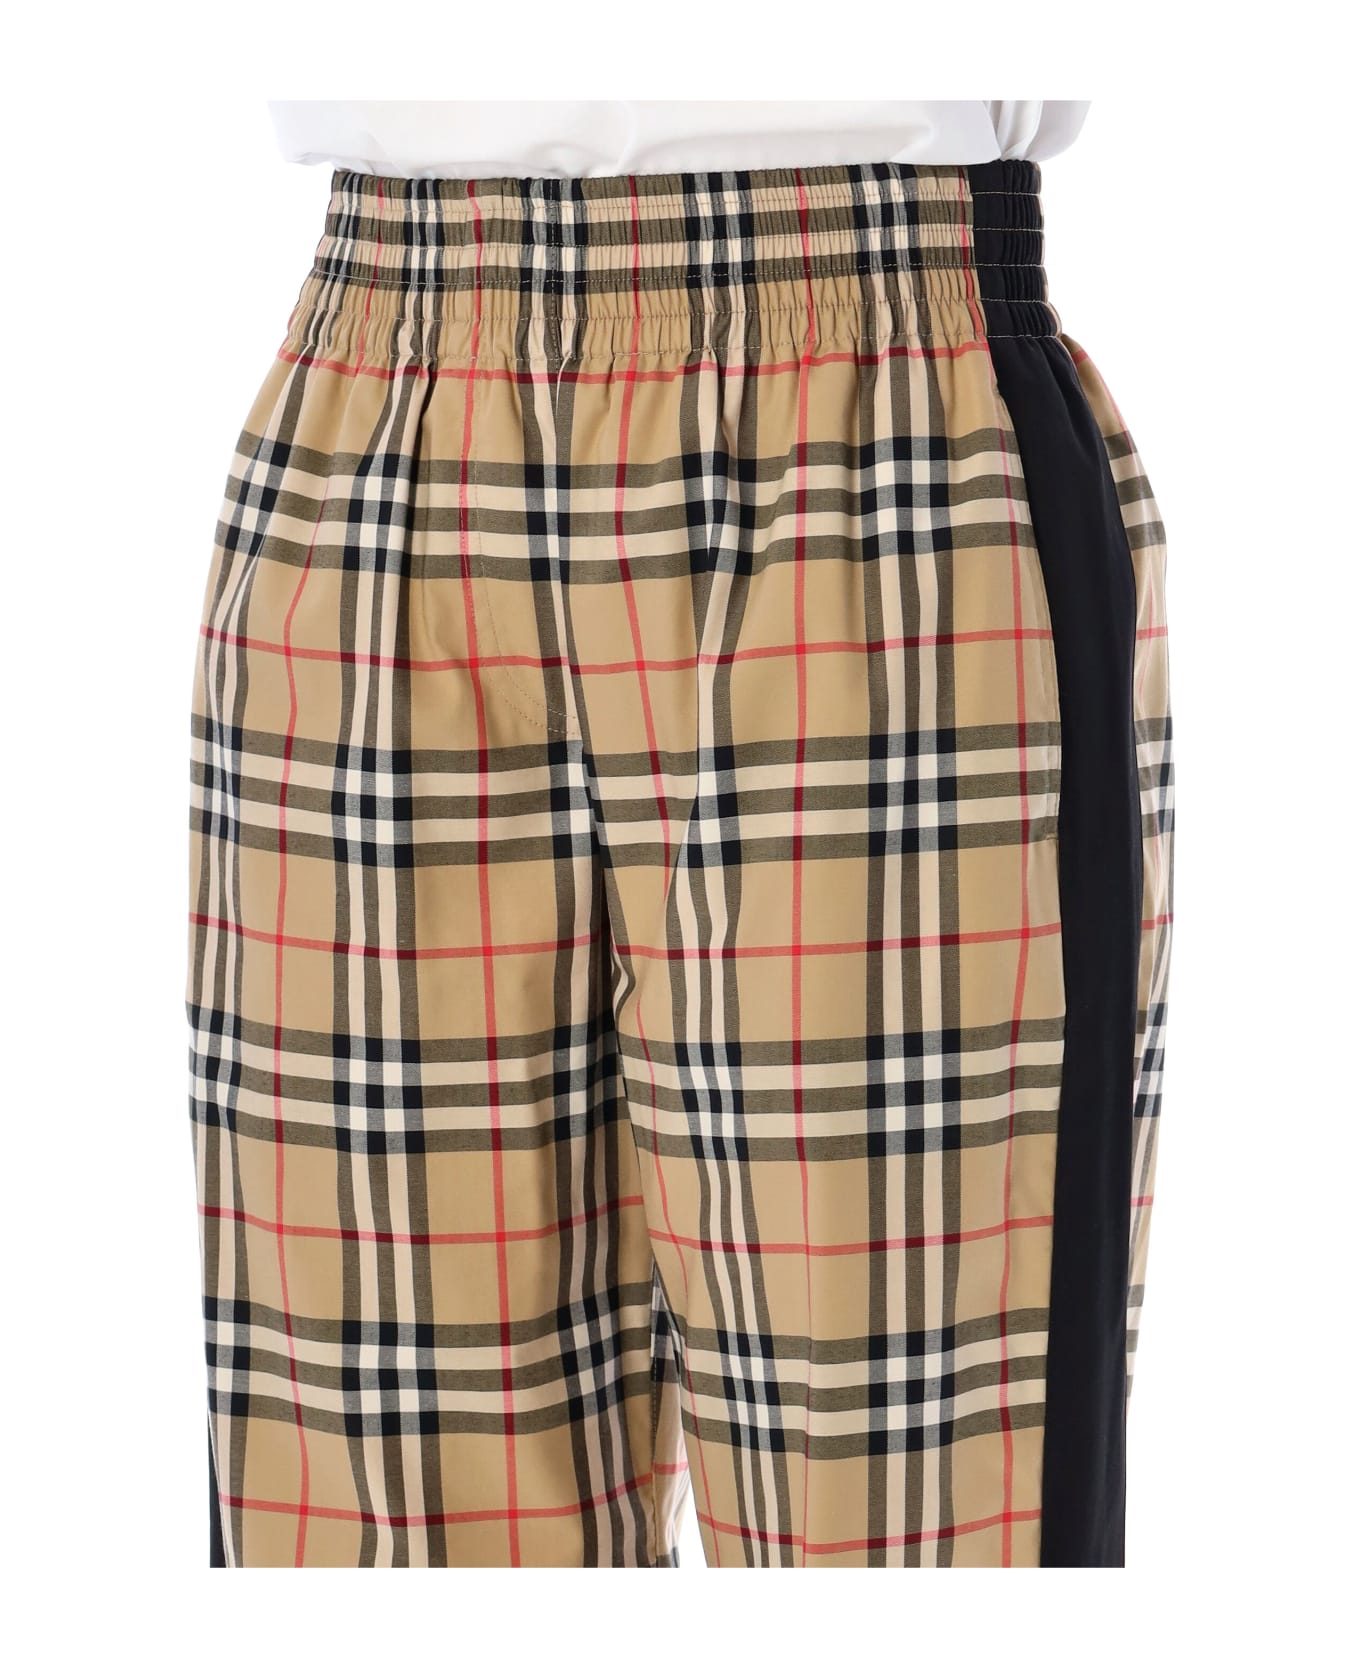 Burberry London Vintage Check Trousers - ARCHIVE BEIGE IP CHK